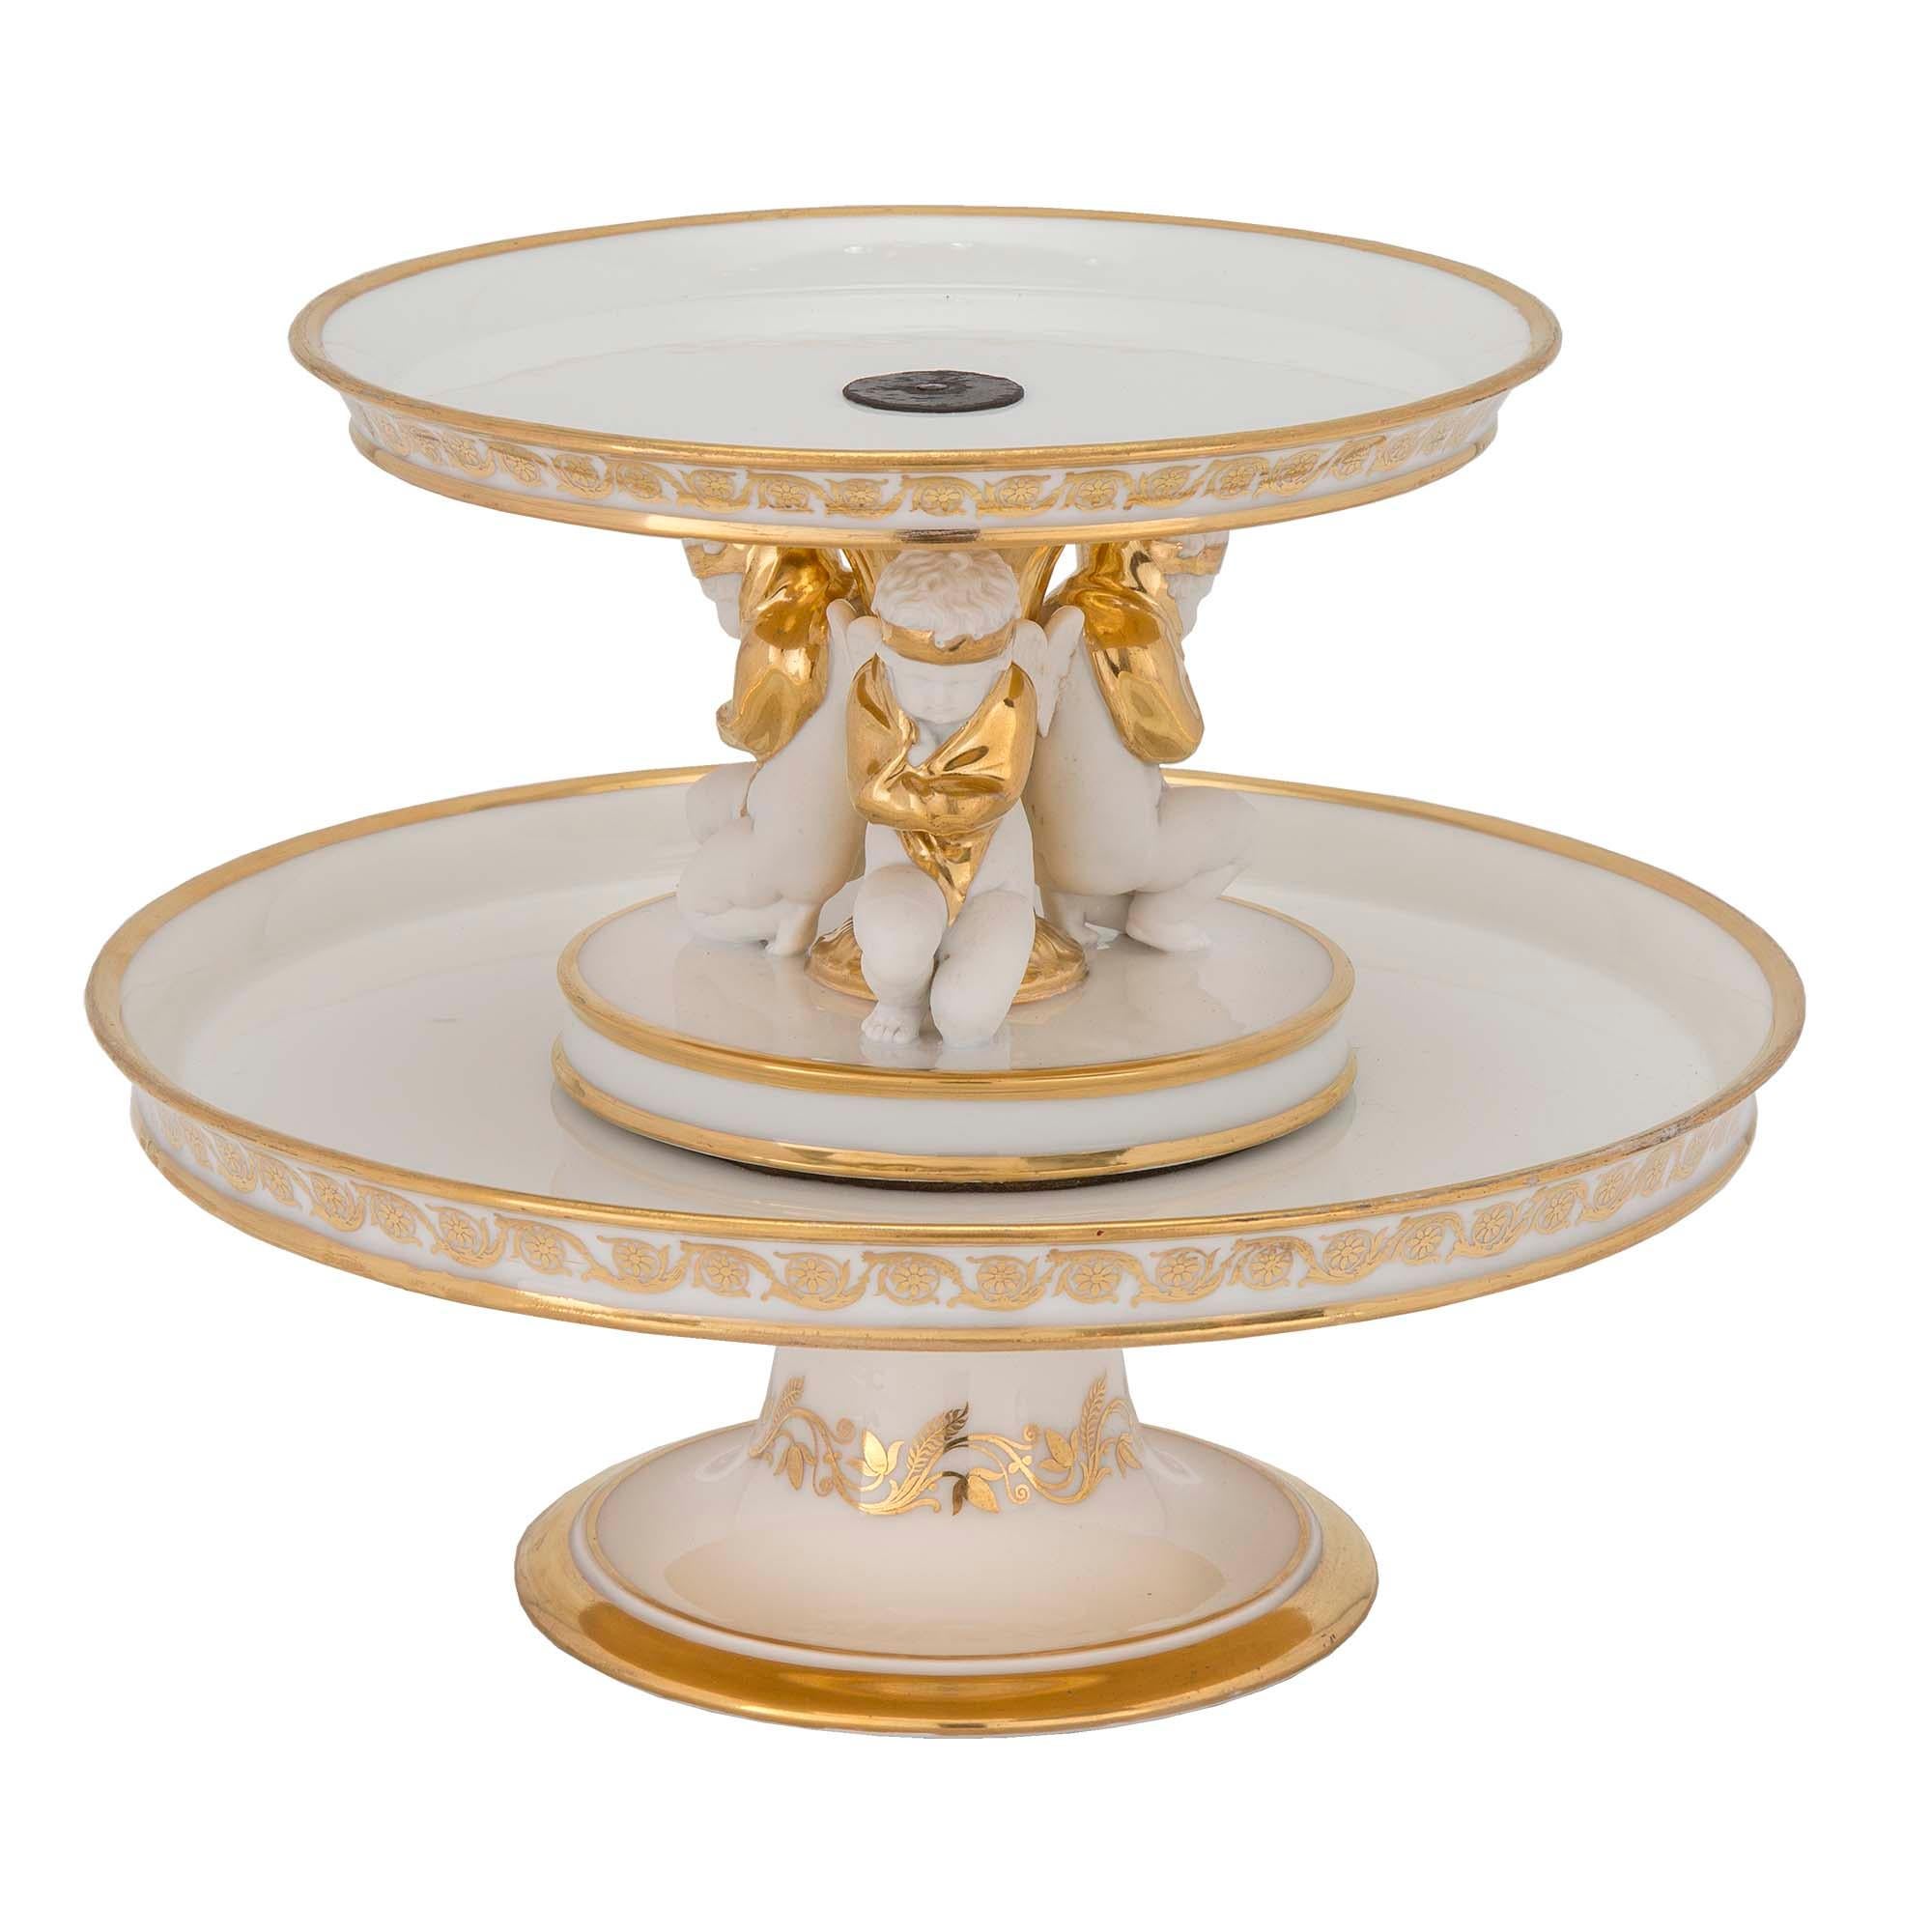 An extremely elegant pair of French 19th century neo-classical st. Porcelain de Paris and gilt, two tiered Presentoirs. Each is raised by a circular socle pedestal with a gilt band and fine foliate design. Each tier display wonderful gilt scrolled